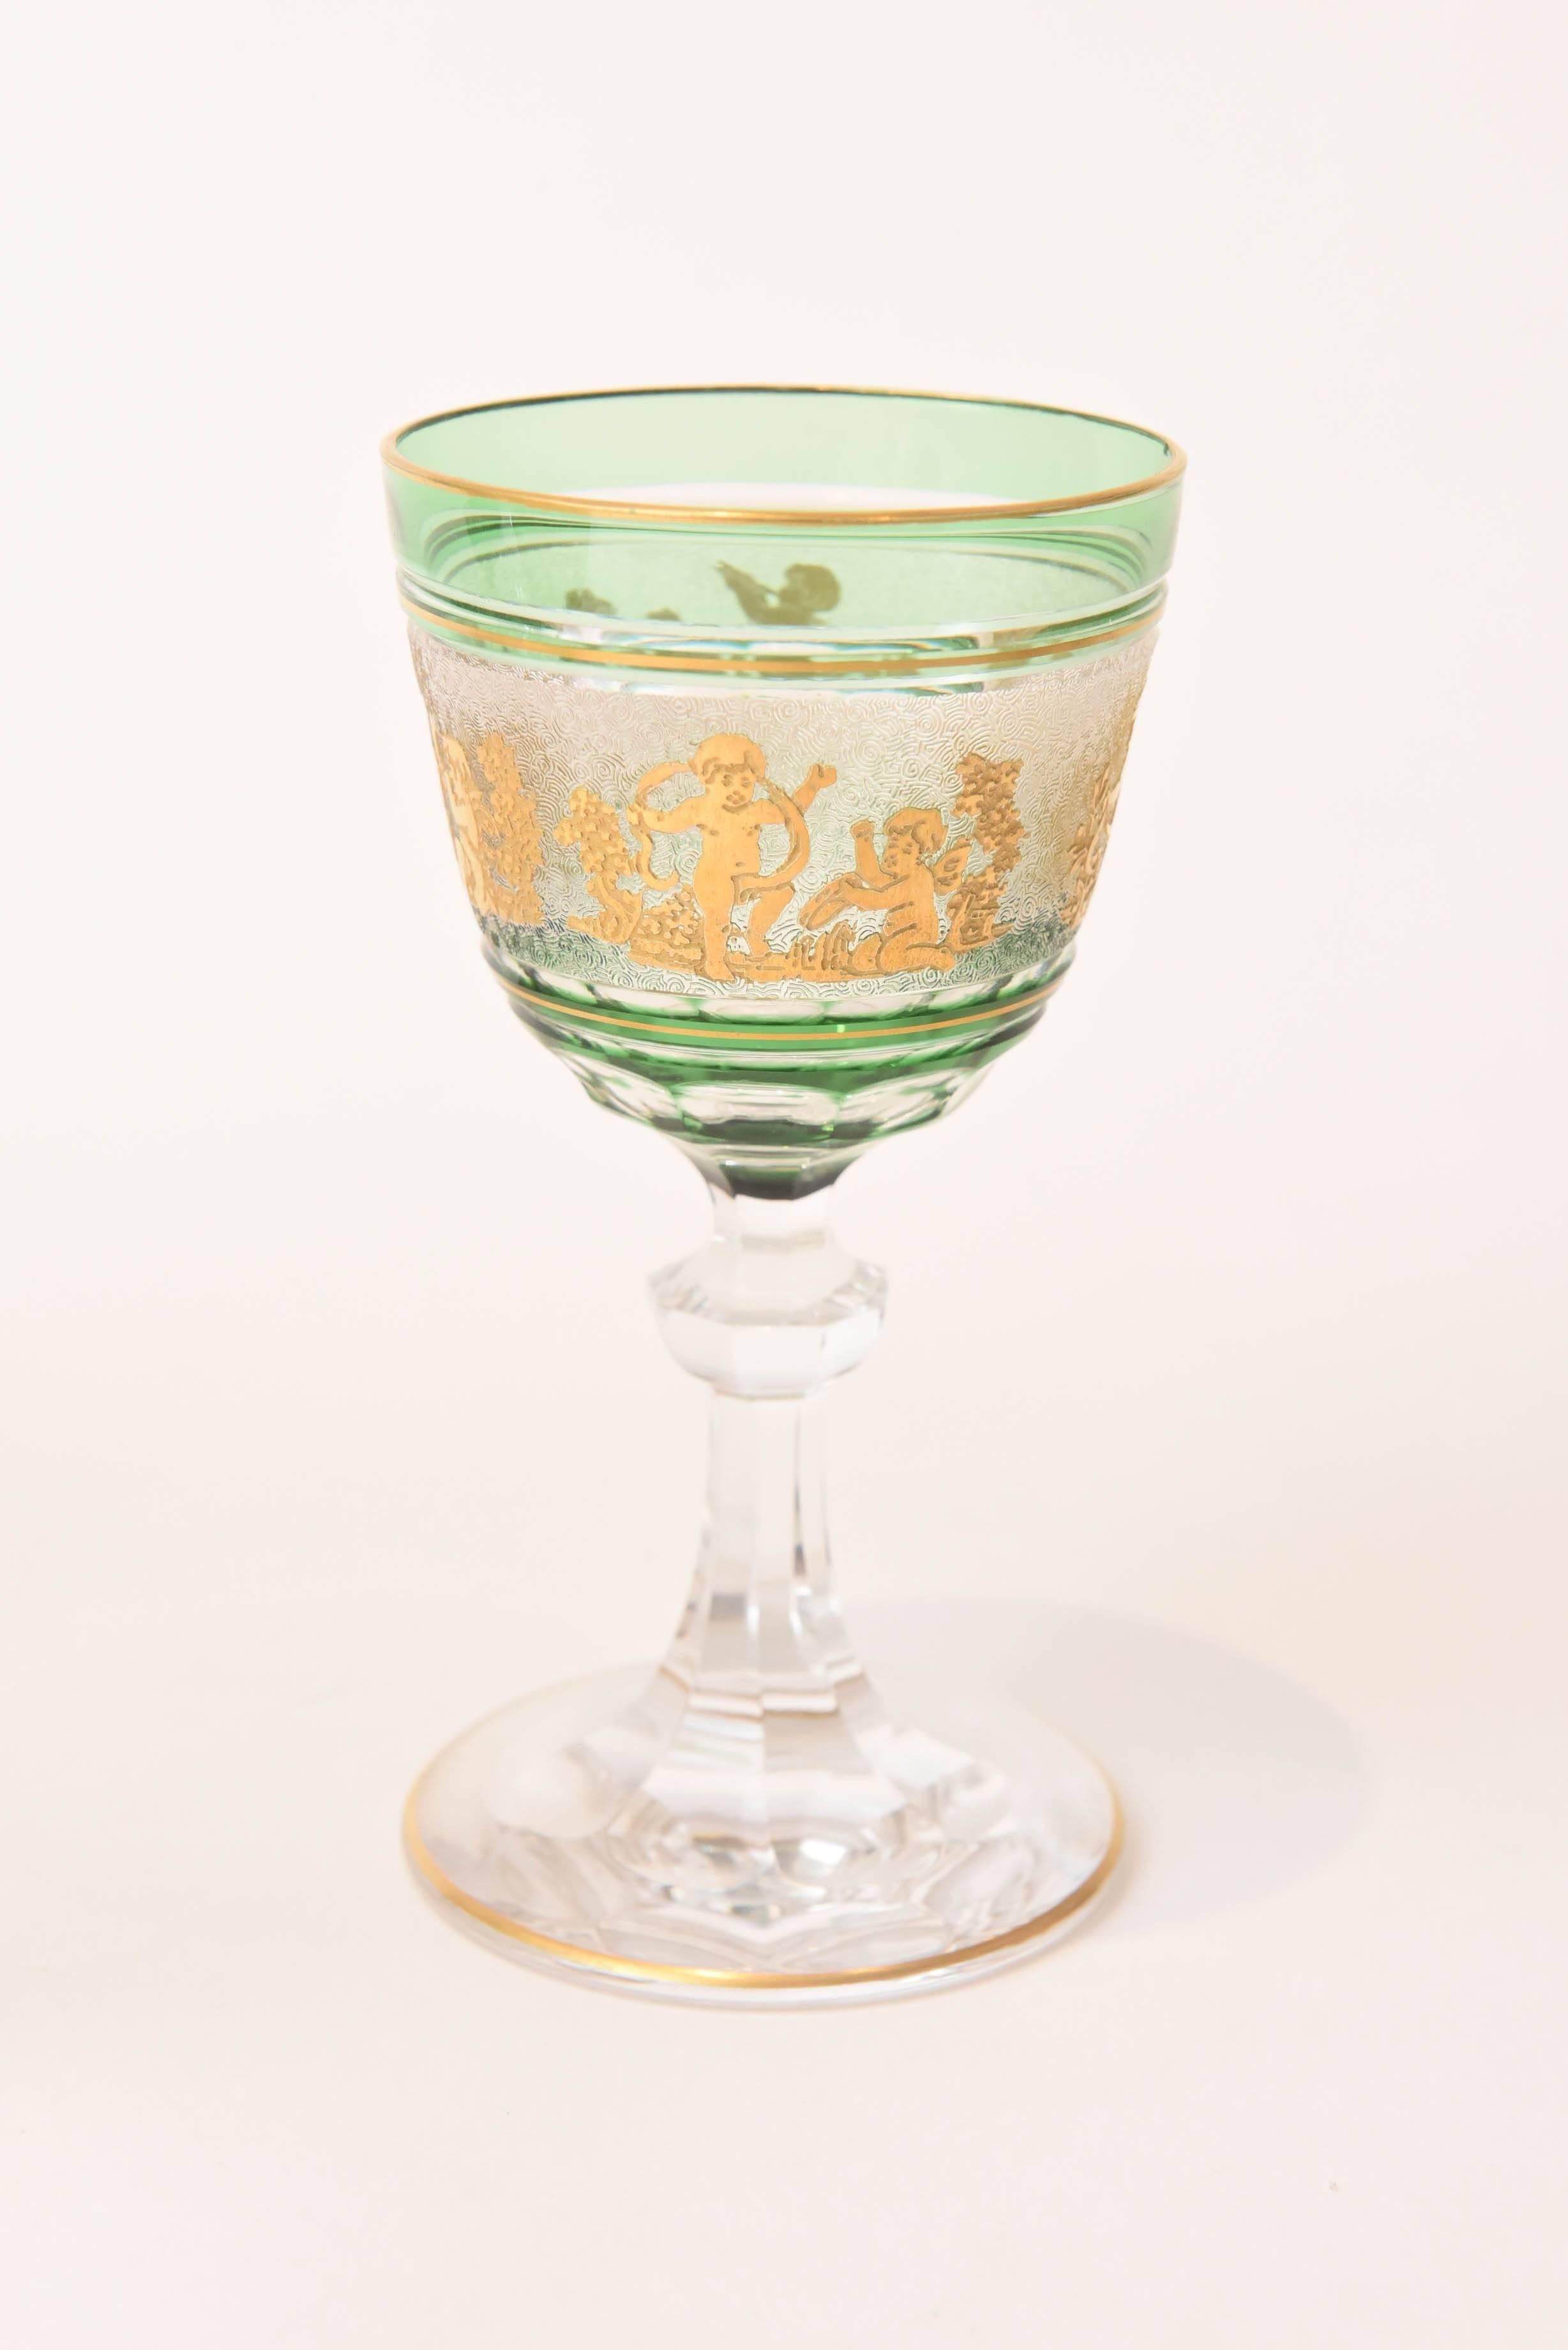 An exquisite set of wine glasses from the storied Belgium glass factory of Val St Lambert. These delightful wine glasses feature gilded cameo figures dancing along an elaborate acid etched background. They also have a beautiful emerald green cased